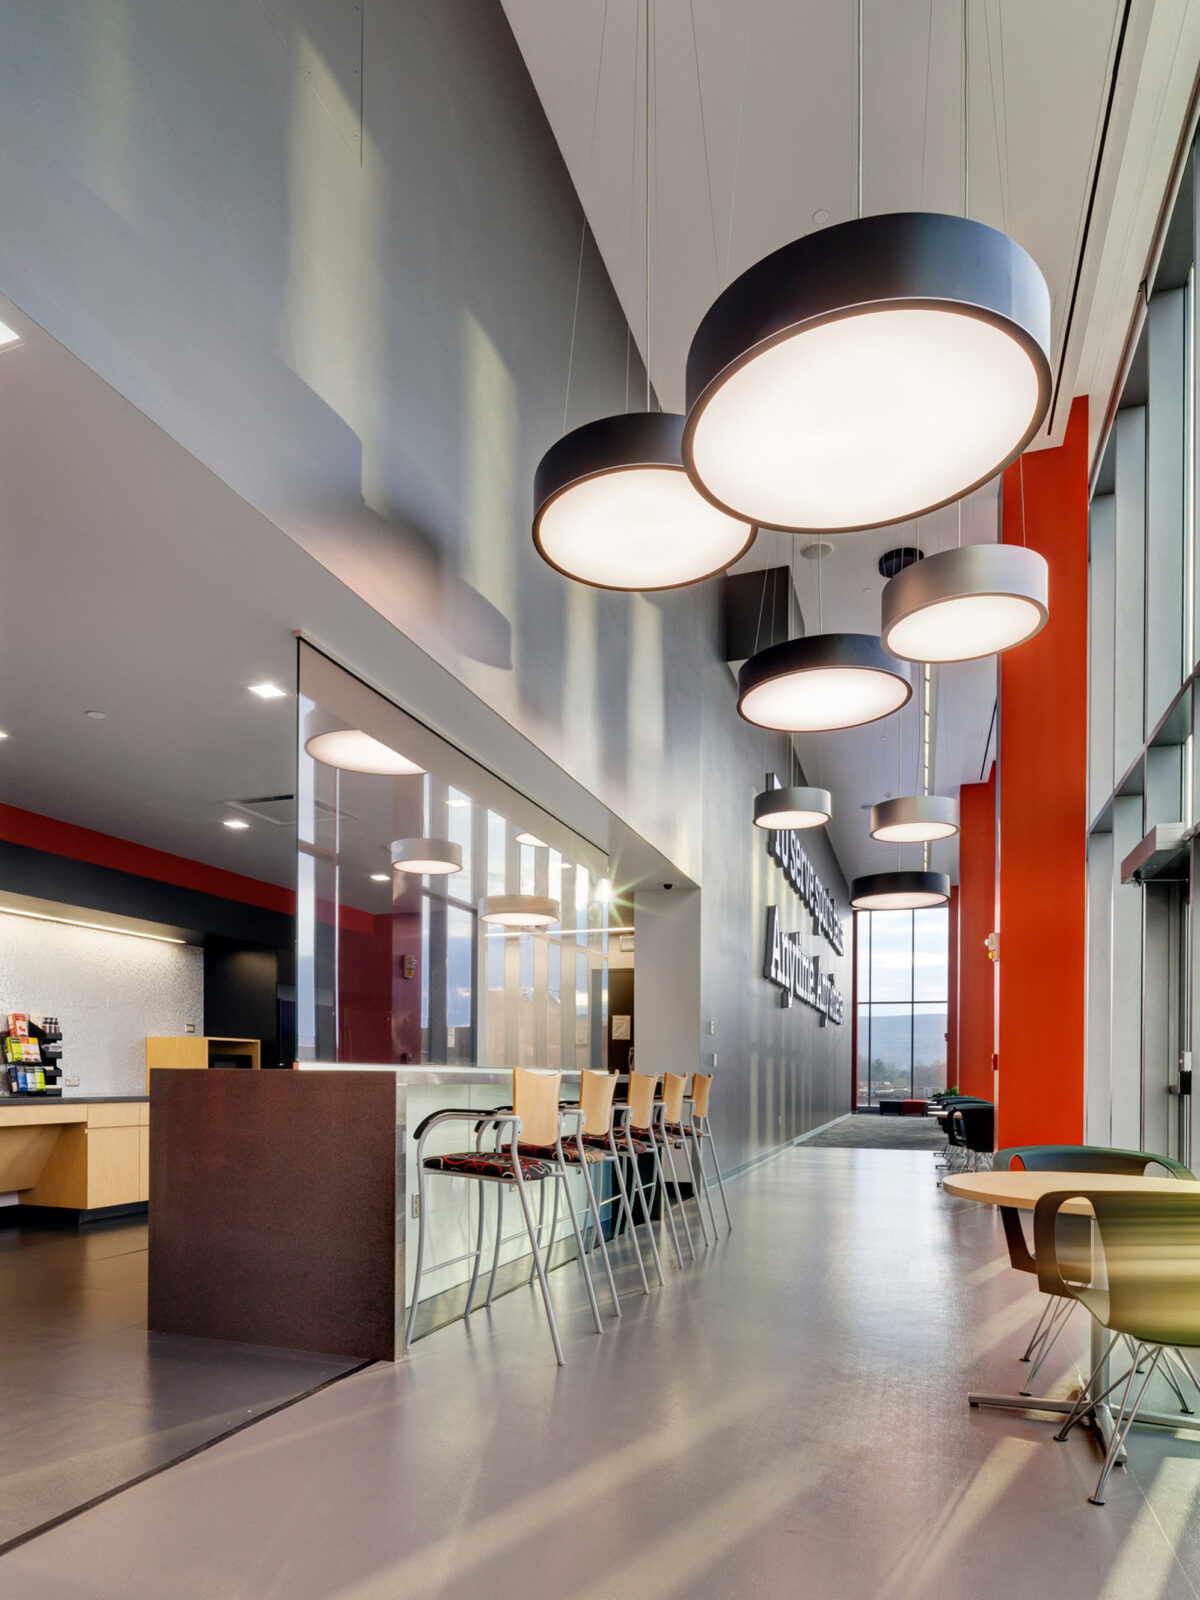 Spacious modern lobby with sleek gray flooring. Large circular pendant lights hang above, complementing the vibrant red accent walls. Minimalist furniture is strategically placed beside expansive glass partitions, contributing to a contemporary aesthetic.